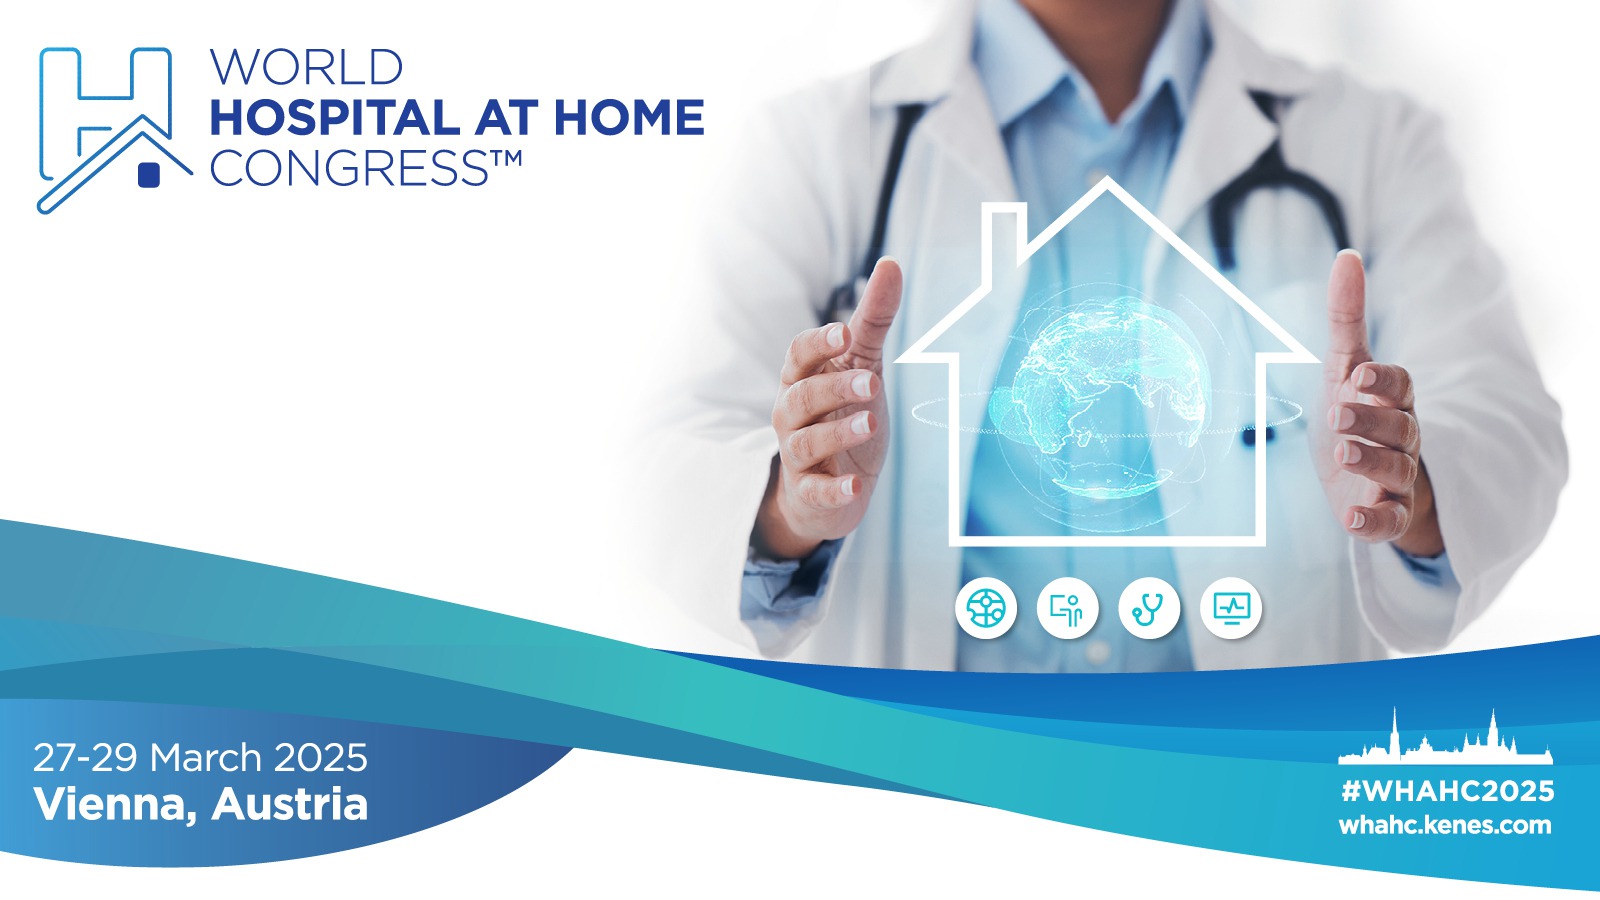 World Hospital at Home Congress™ (WHAHC 2025)